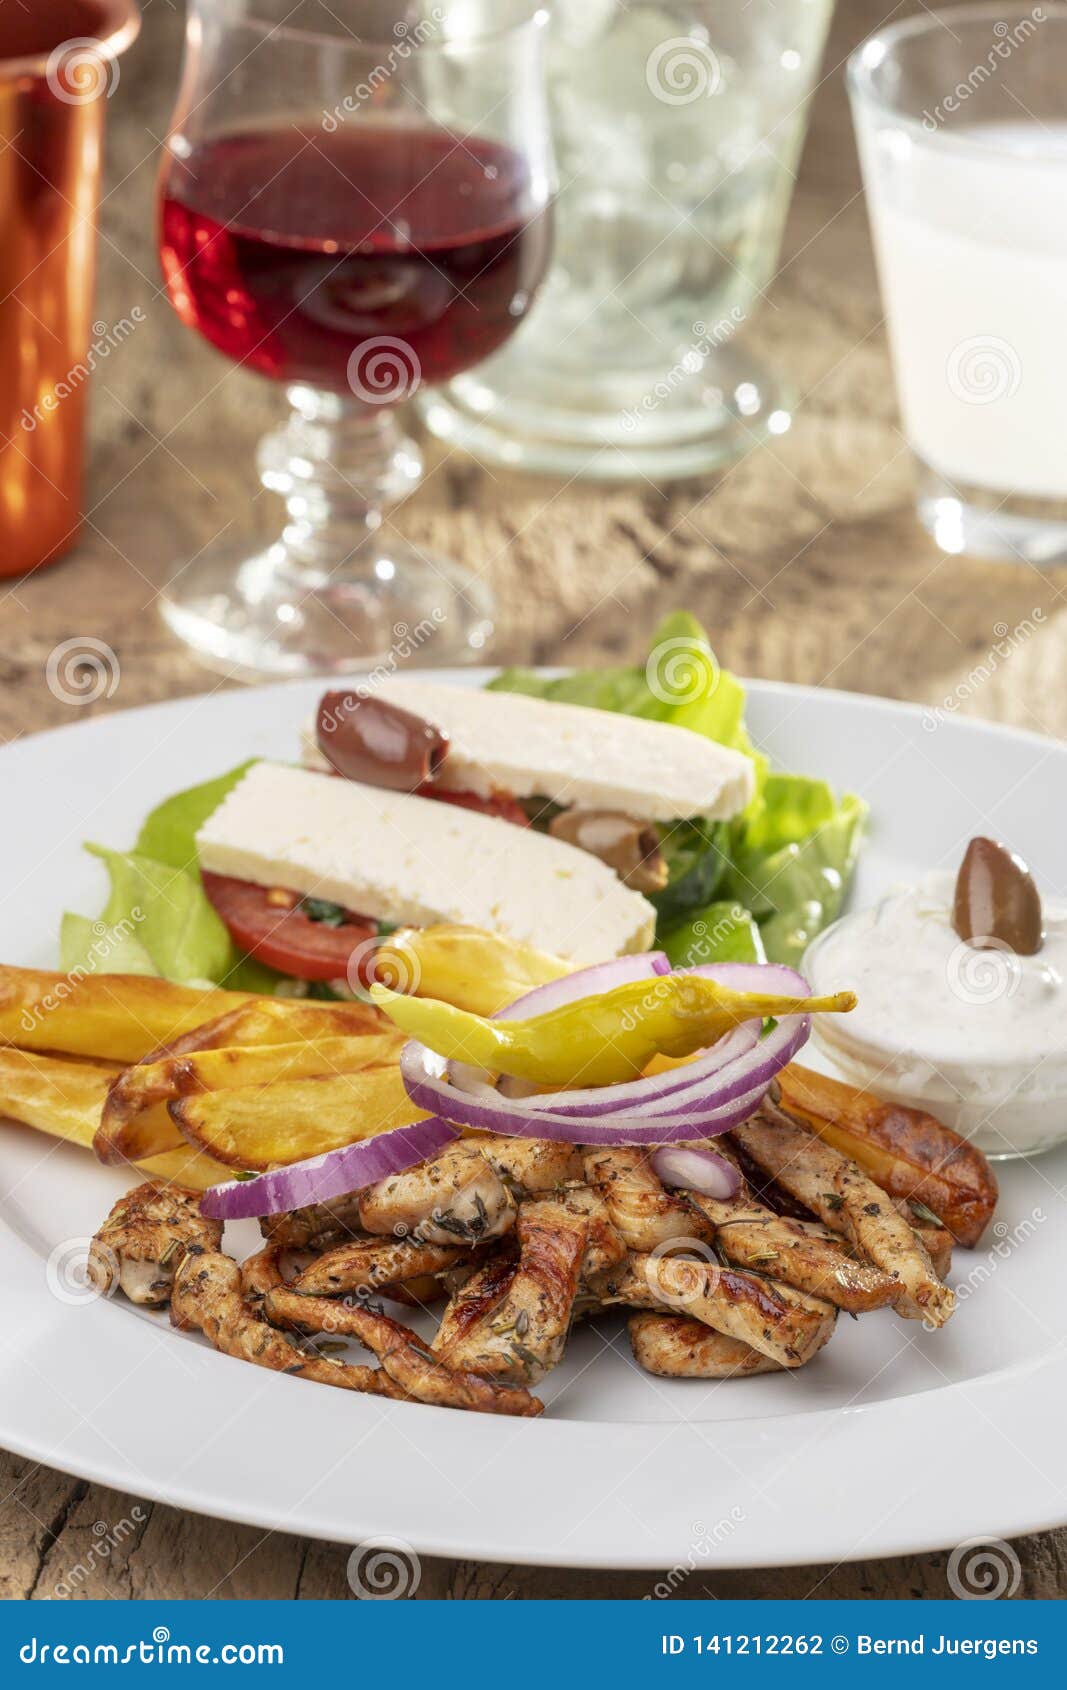 Greek gyros on a plate stock photo. Image of fries, meat - 141212262